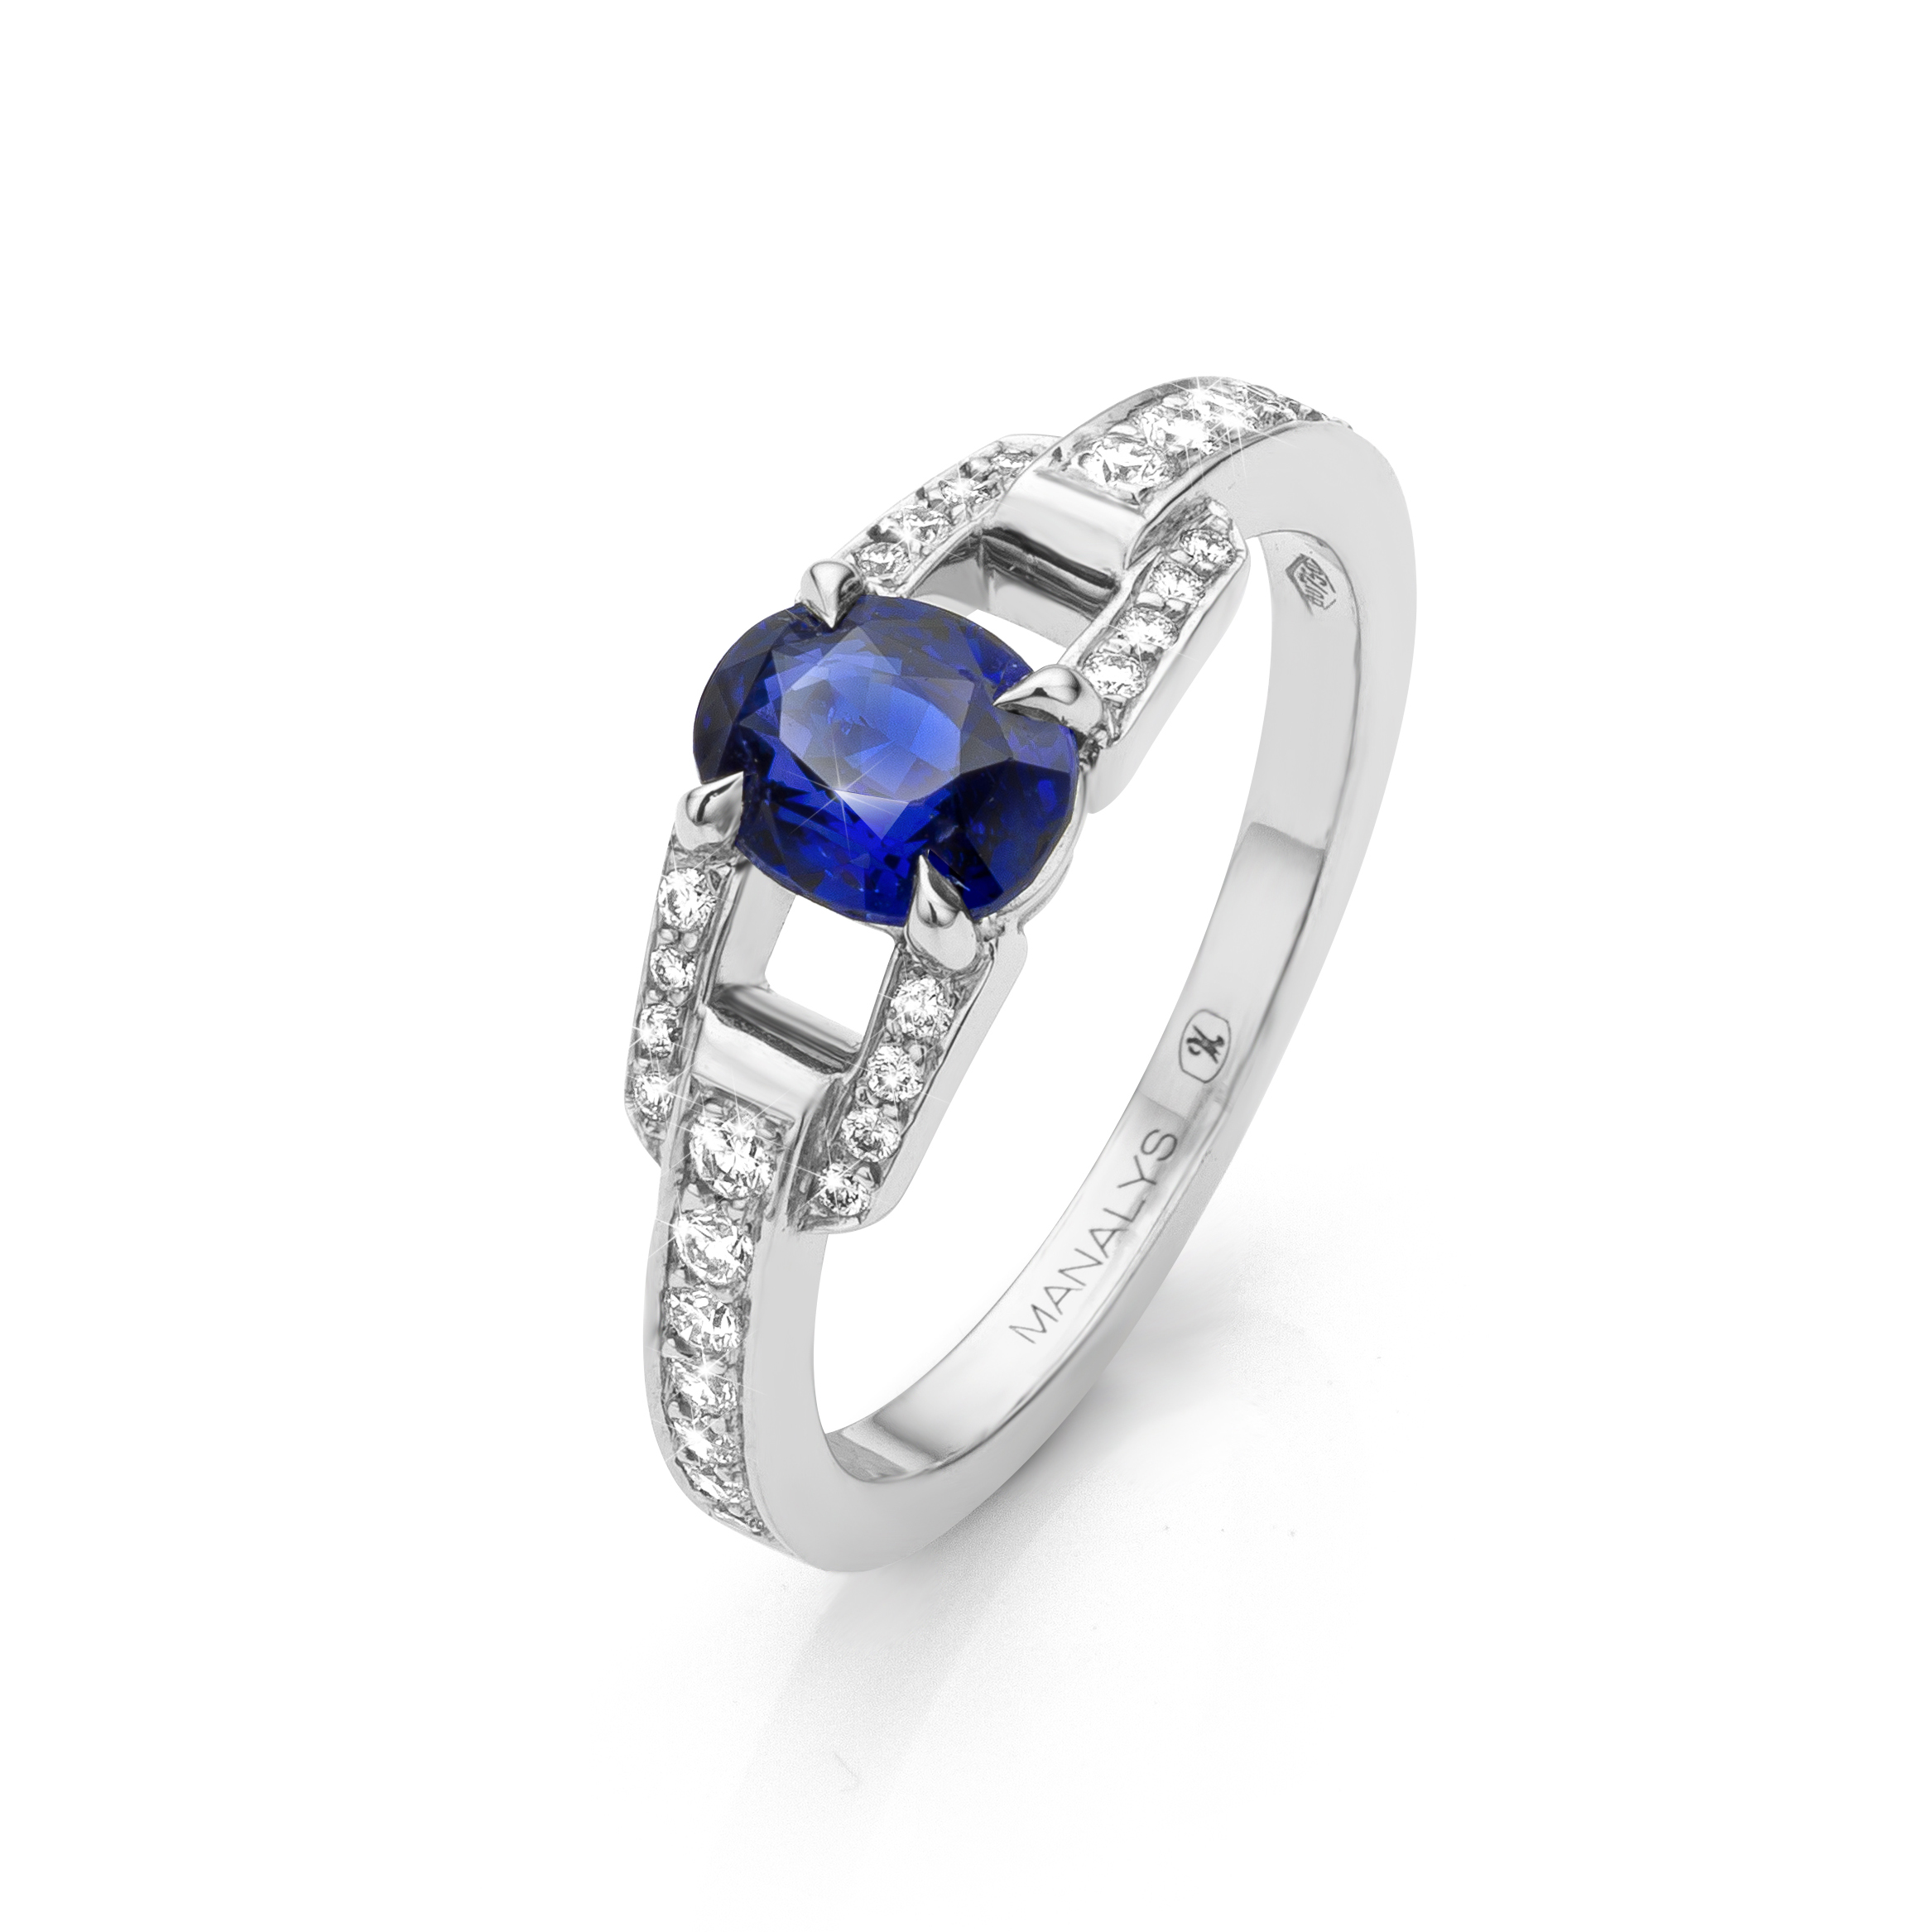 The Manalys sapphire solitaire ring